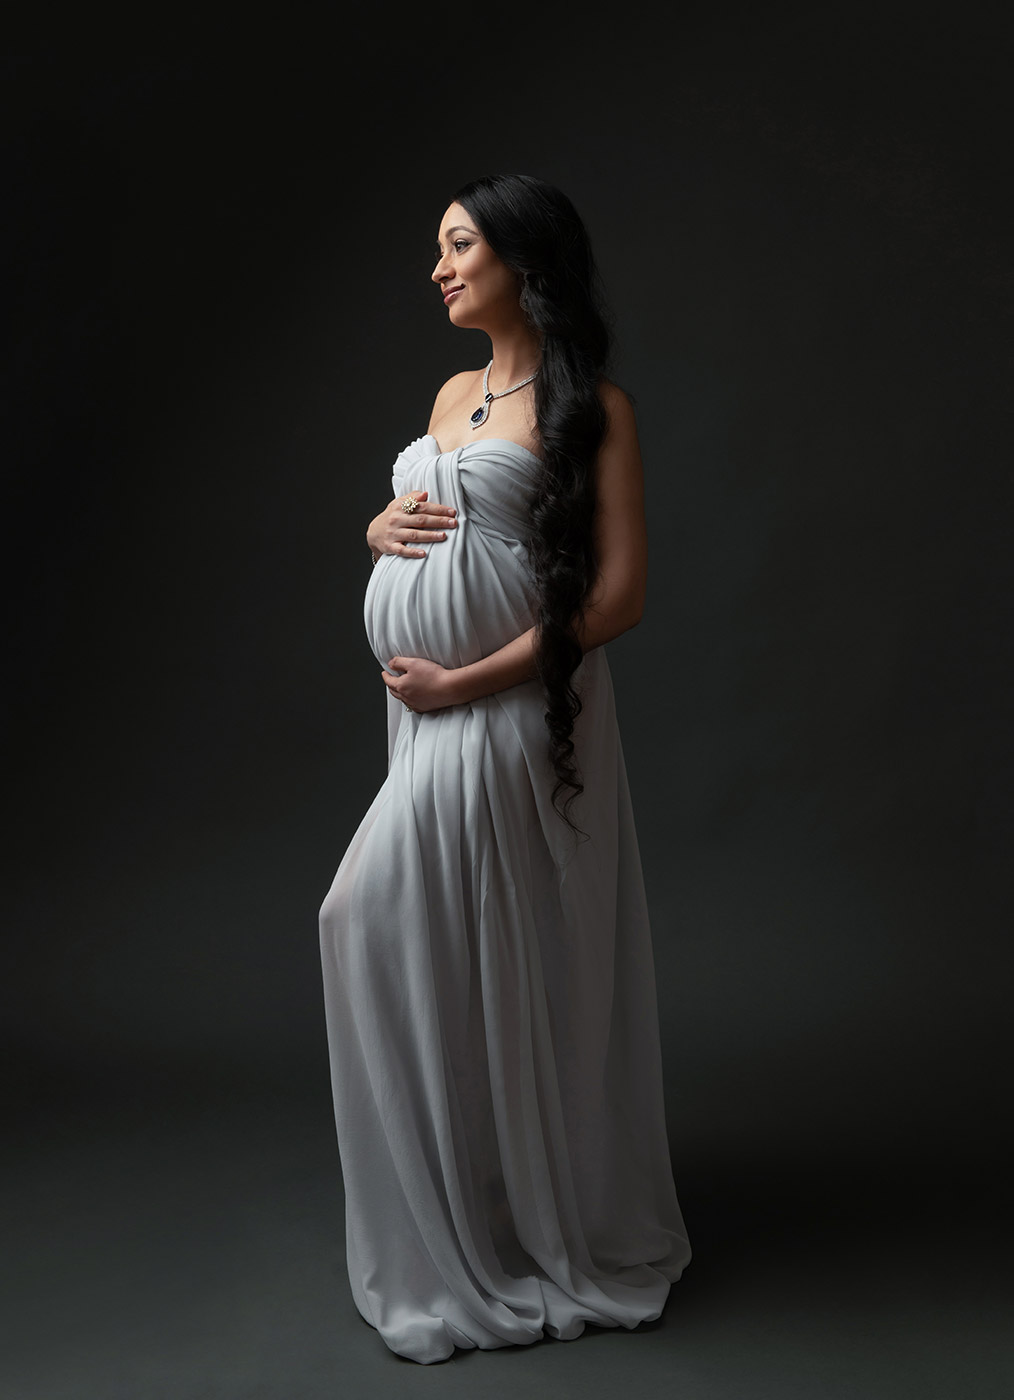 pregnant woman with long black hair and blue silk gown posing for studio silhouette